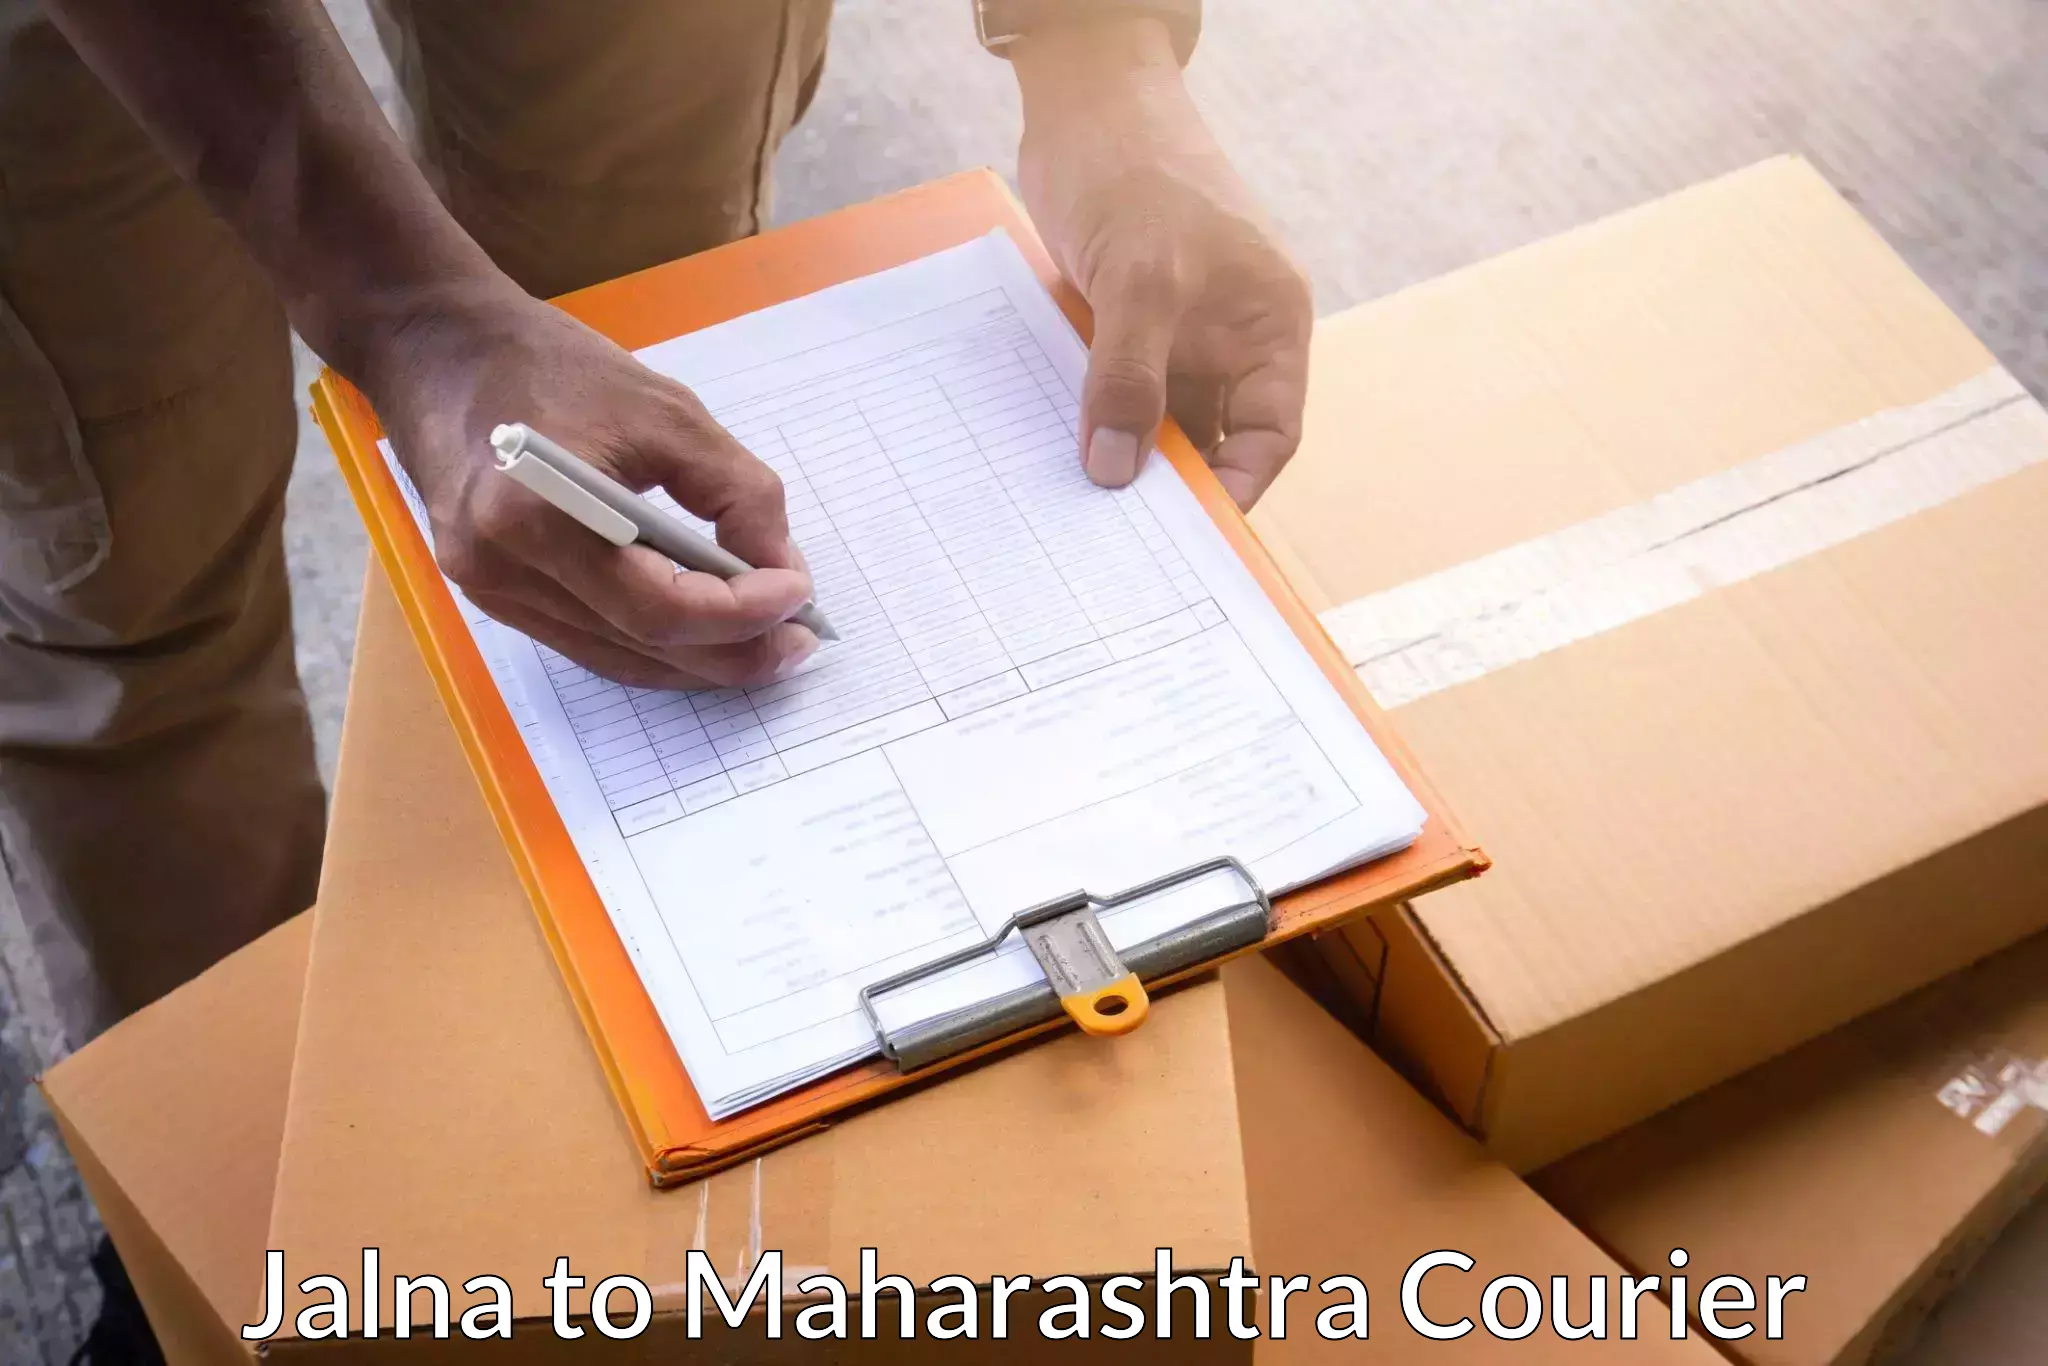 Small parcel delivery in Jalna to Shirdi